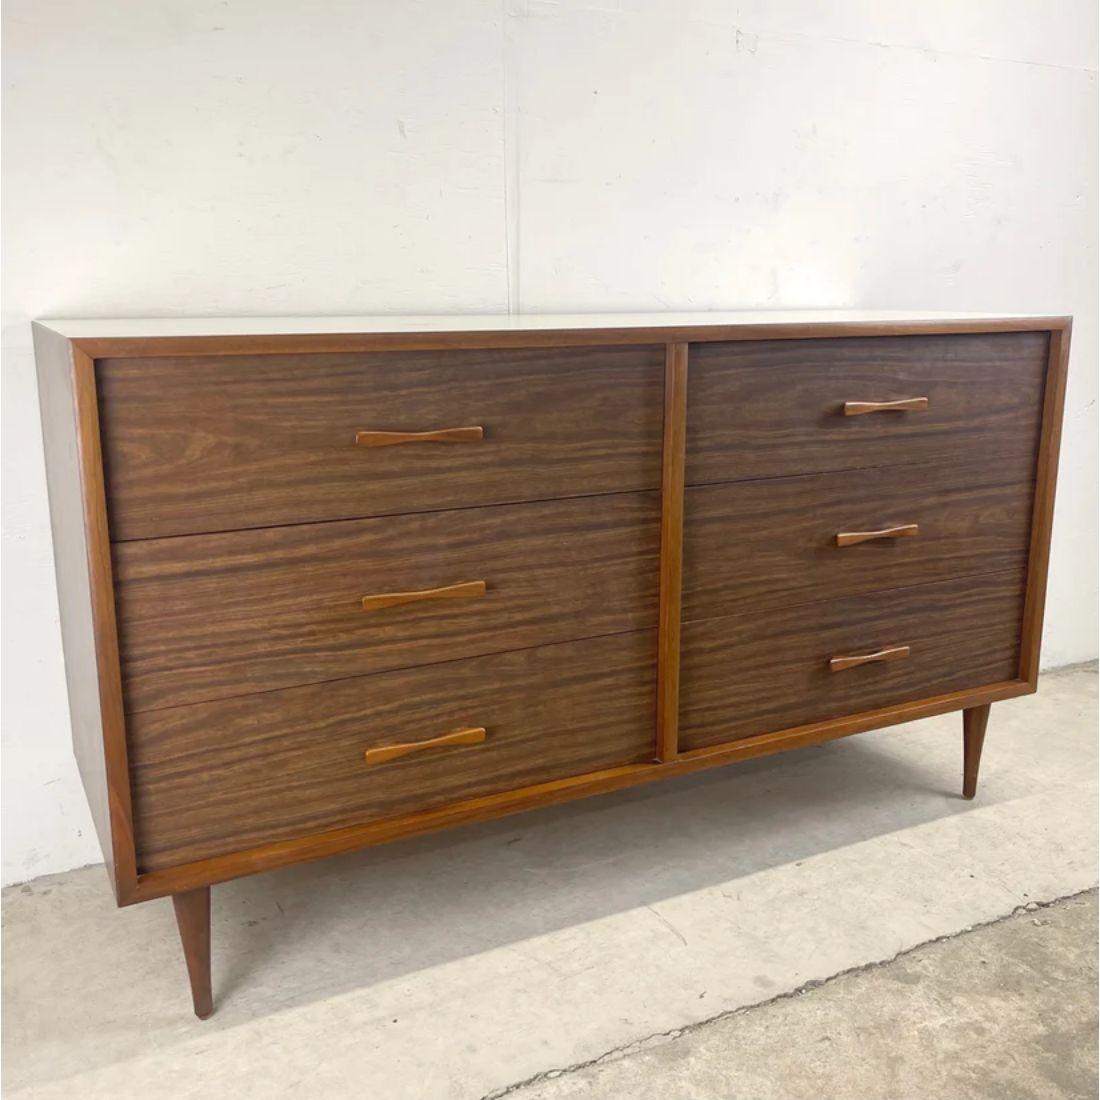 This stylish Mid-Century Modern dresser offers six spacious drawers for plenty of bedroom storage in a petite package. The bowtie handles and faux walnut finish add a warm modern centerpiece to any room while complimented by the durable white